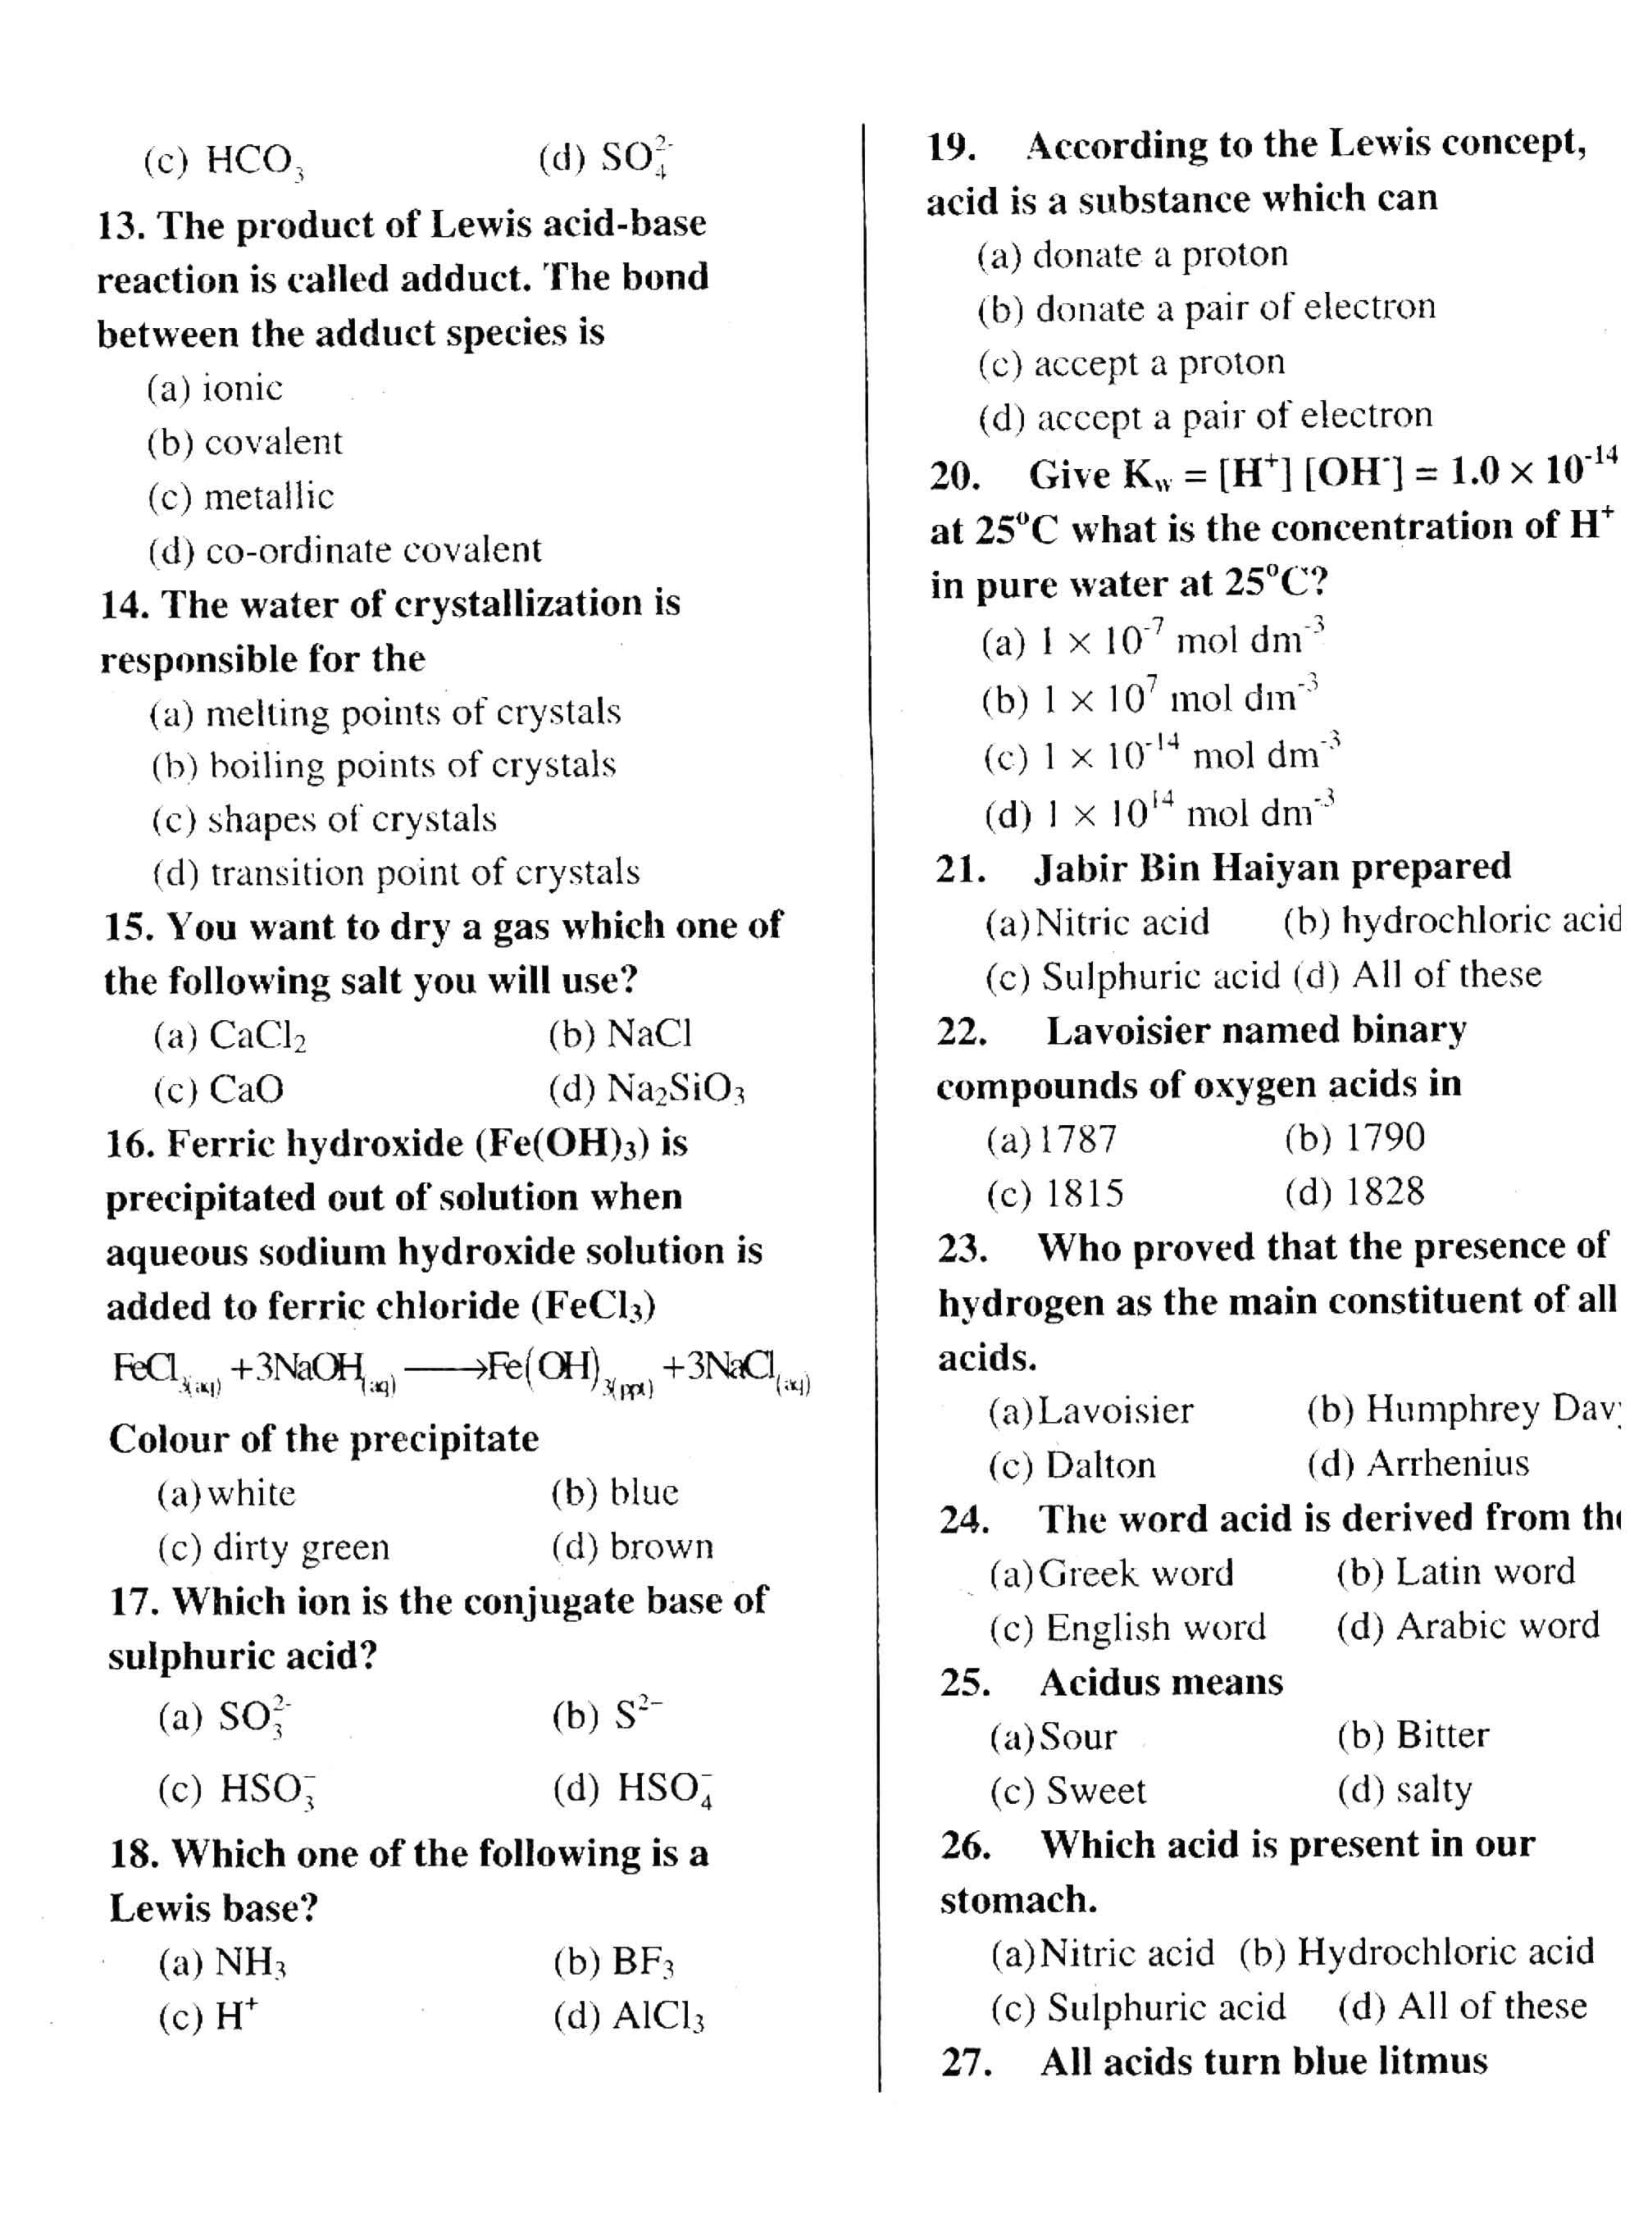 Chapter 2 Notes Chemistry 10th Class Chapter: Acid Bases and Salts {MCQs}